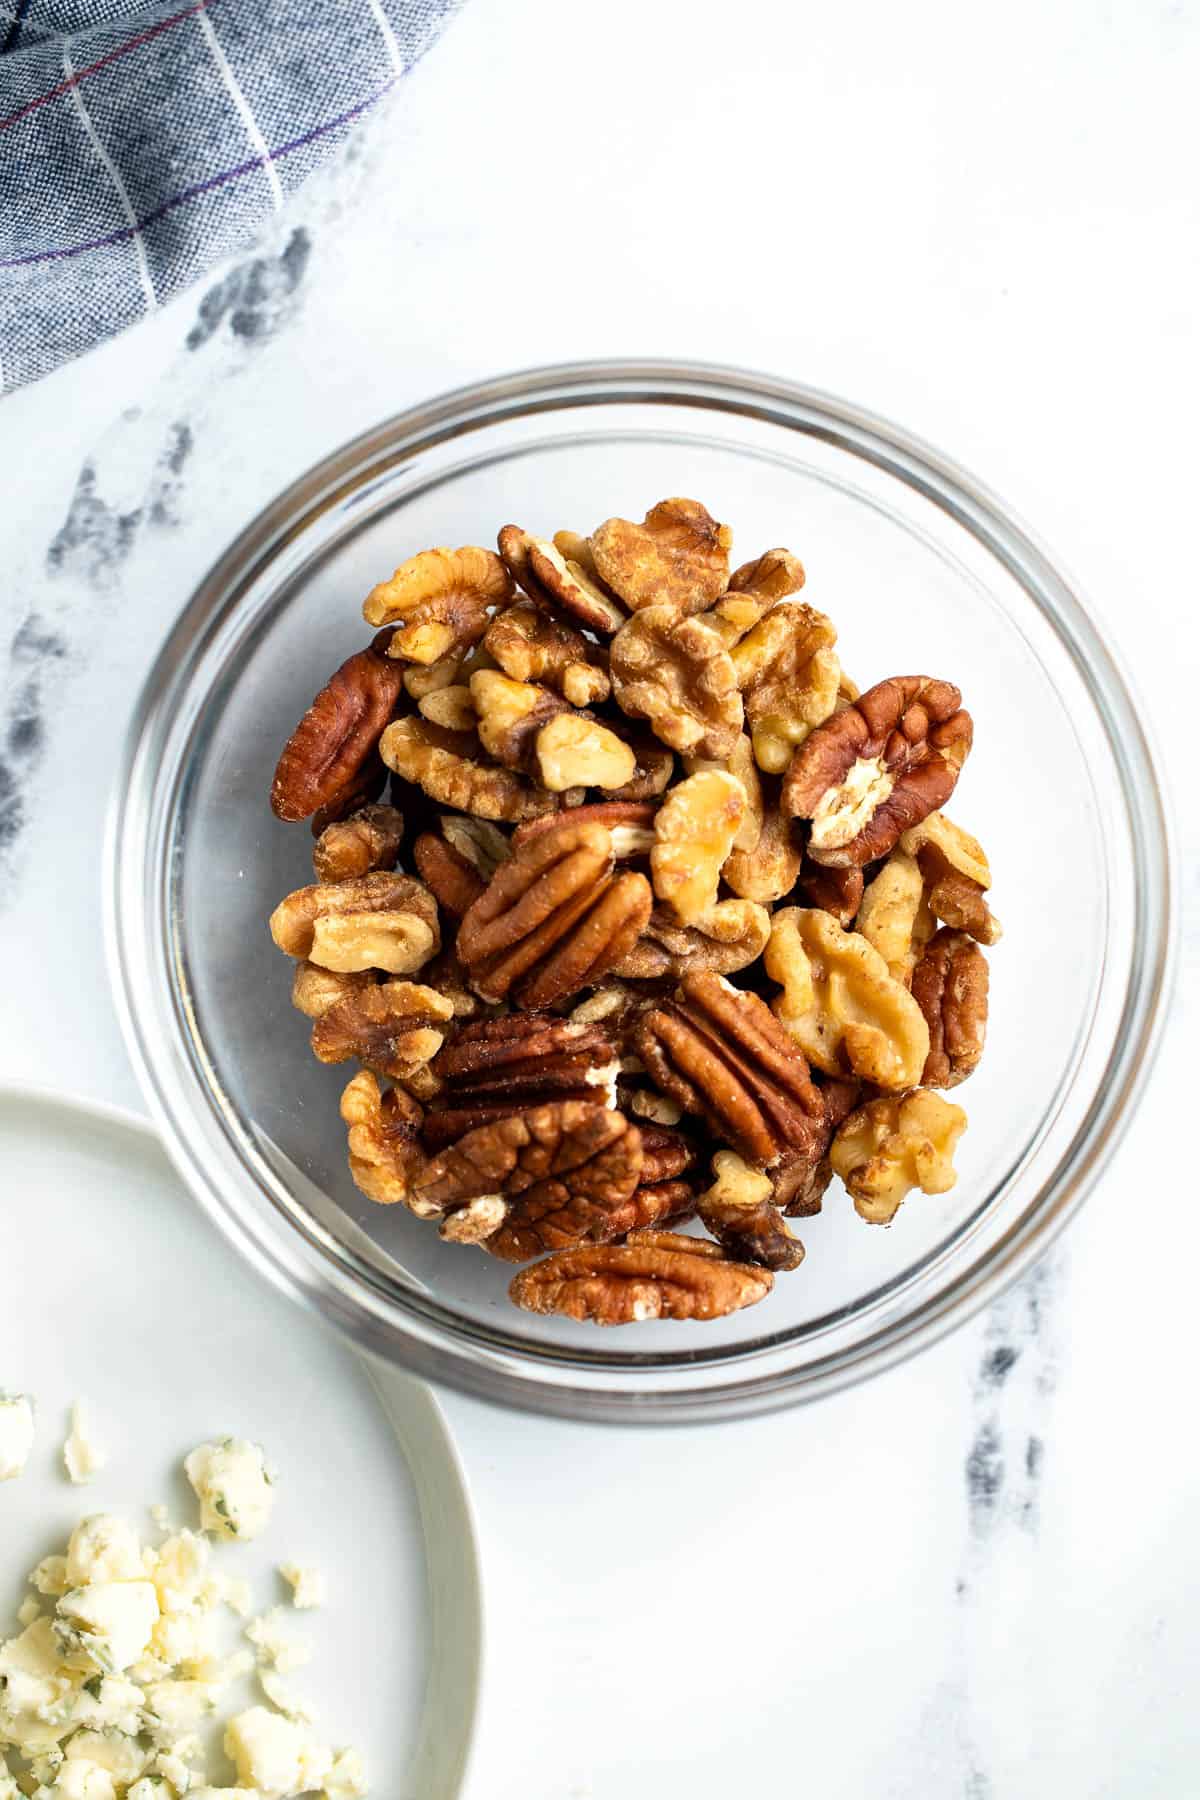 Toasted pecans and walnuts in a glass bowl.